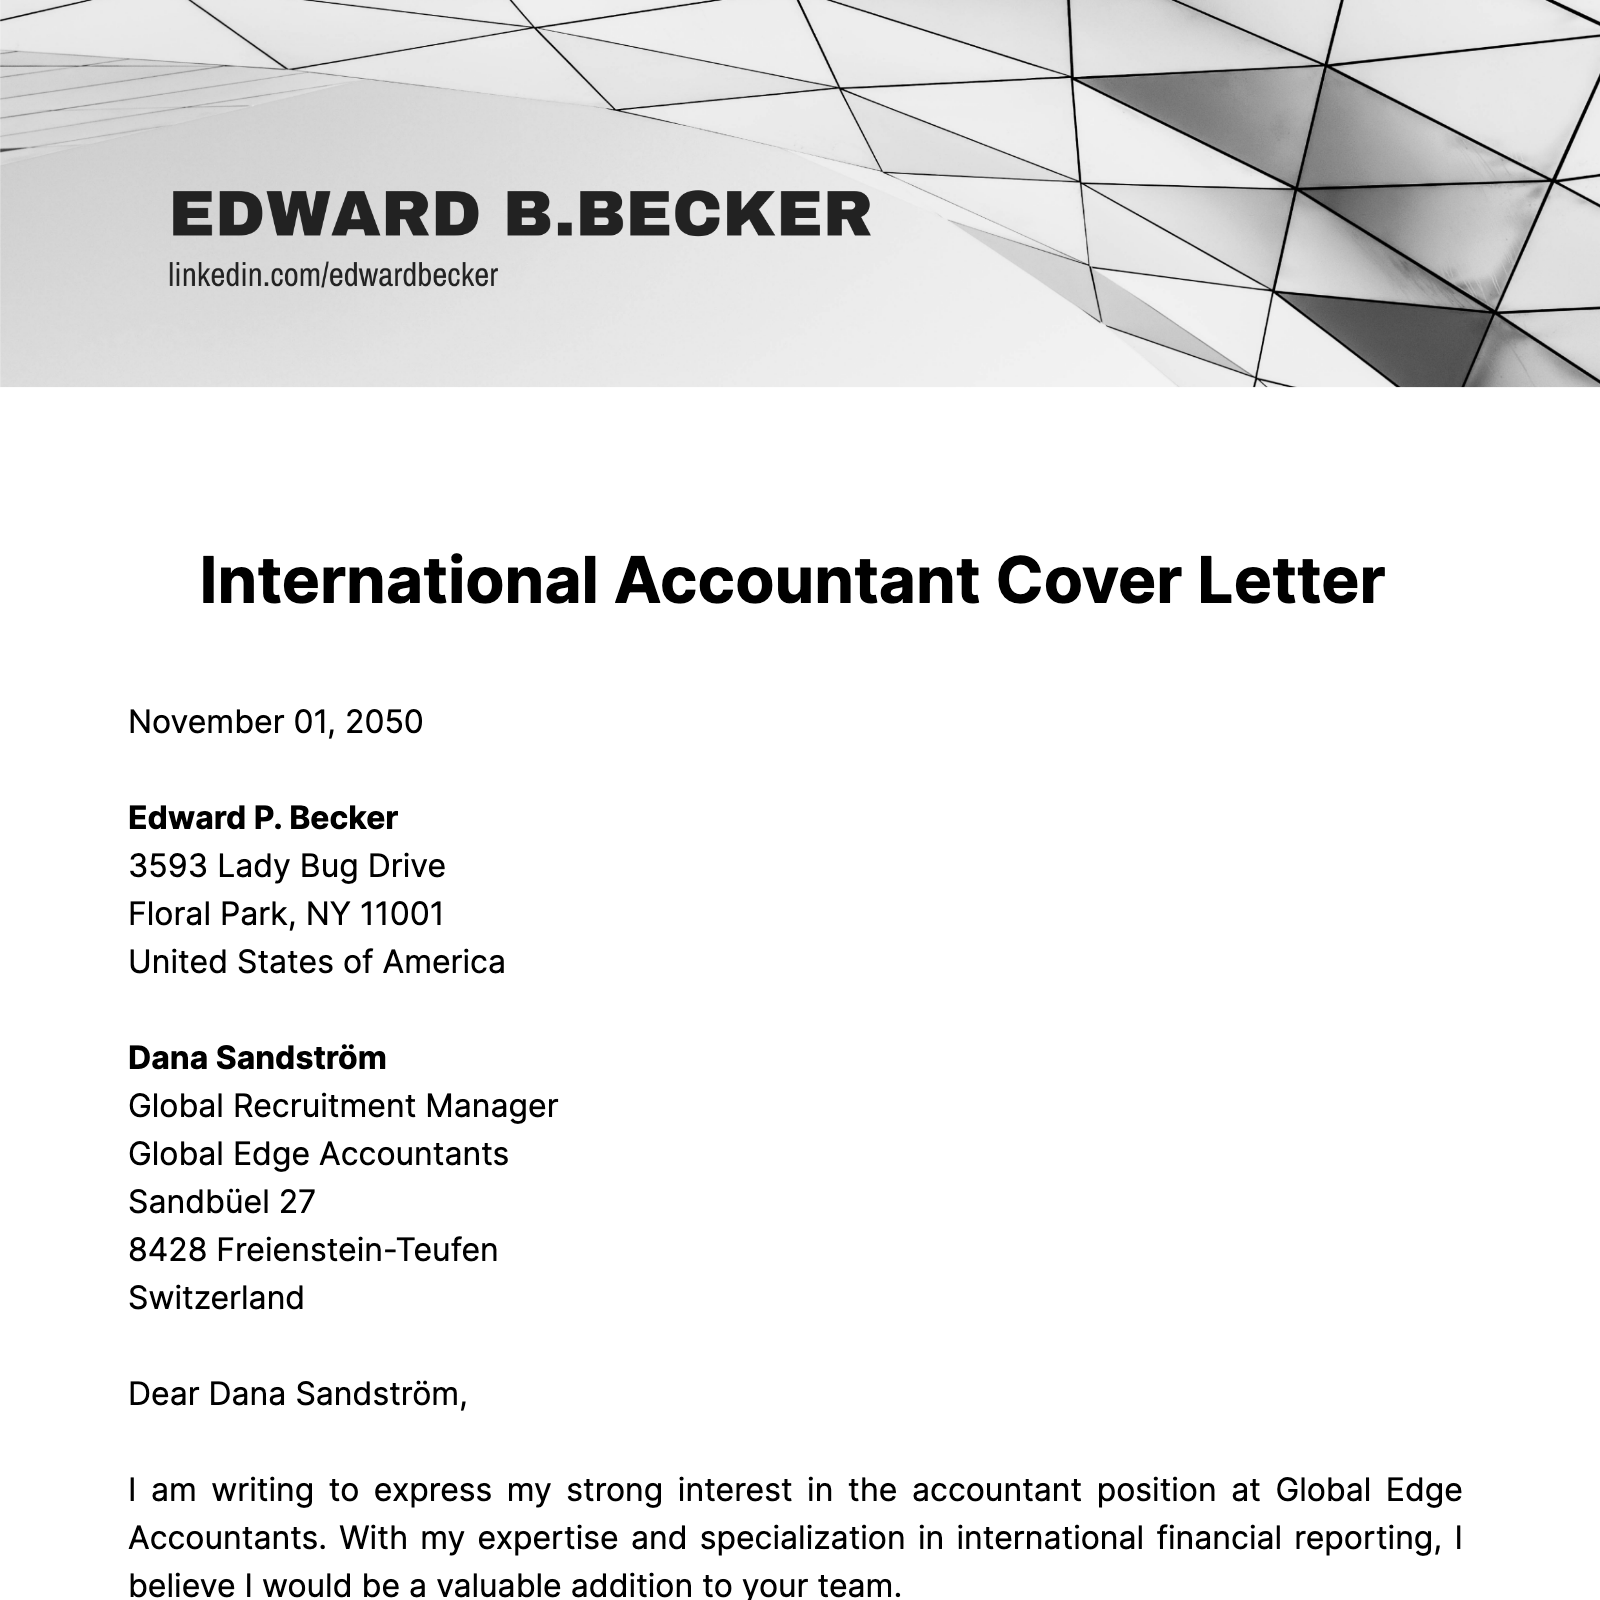 International Accountant Cover Letter Template